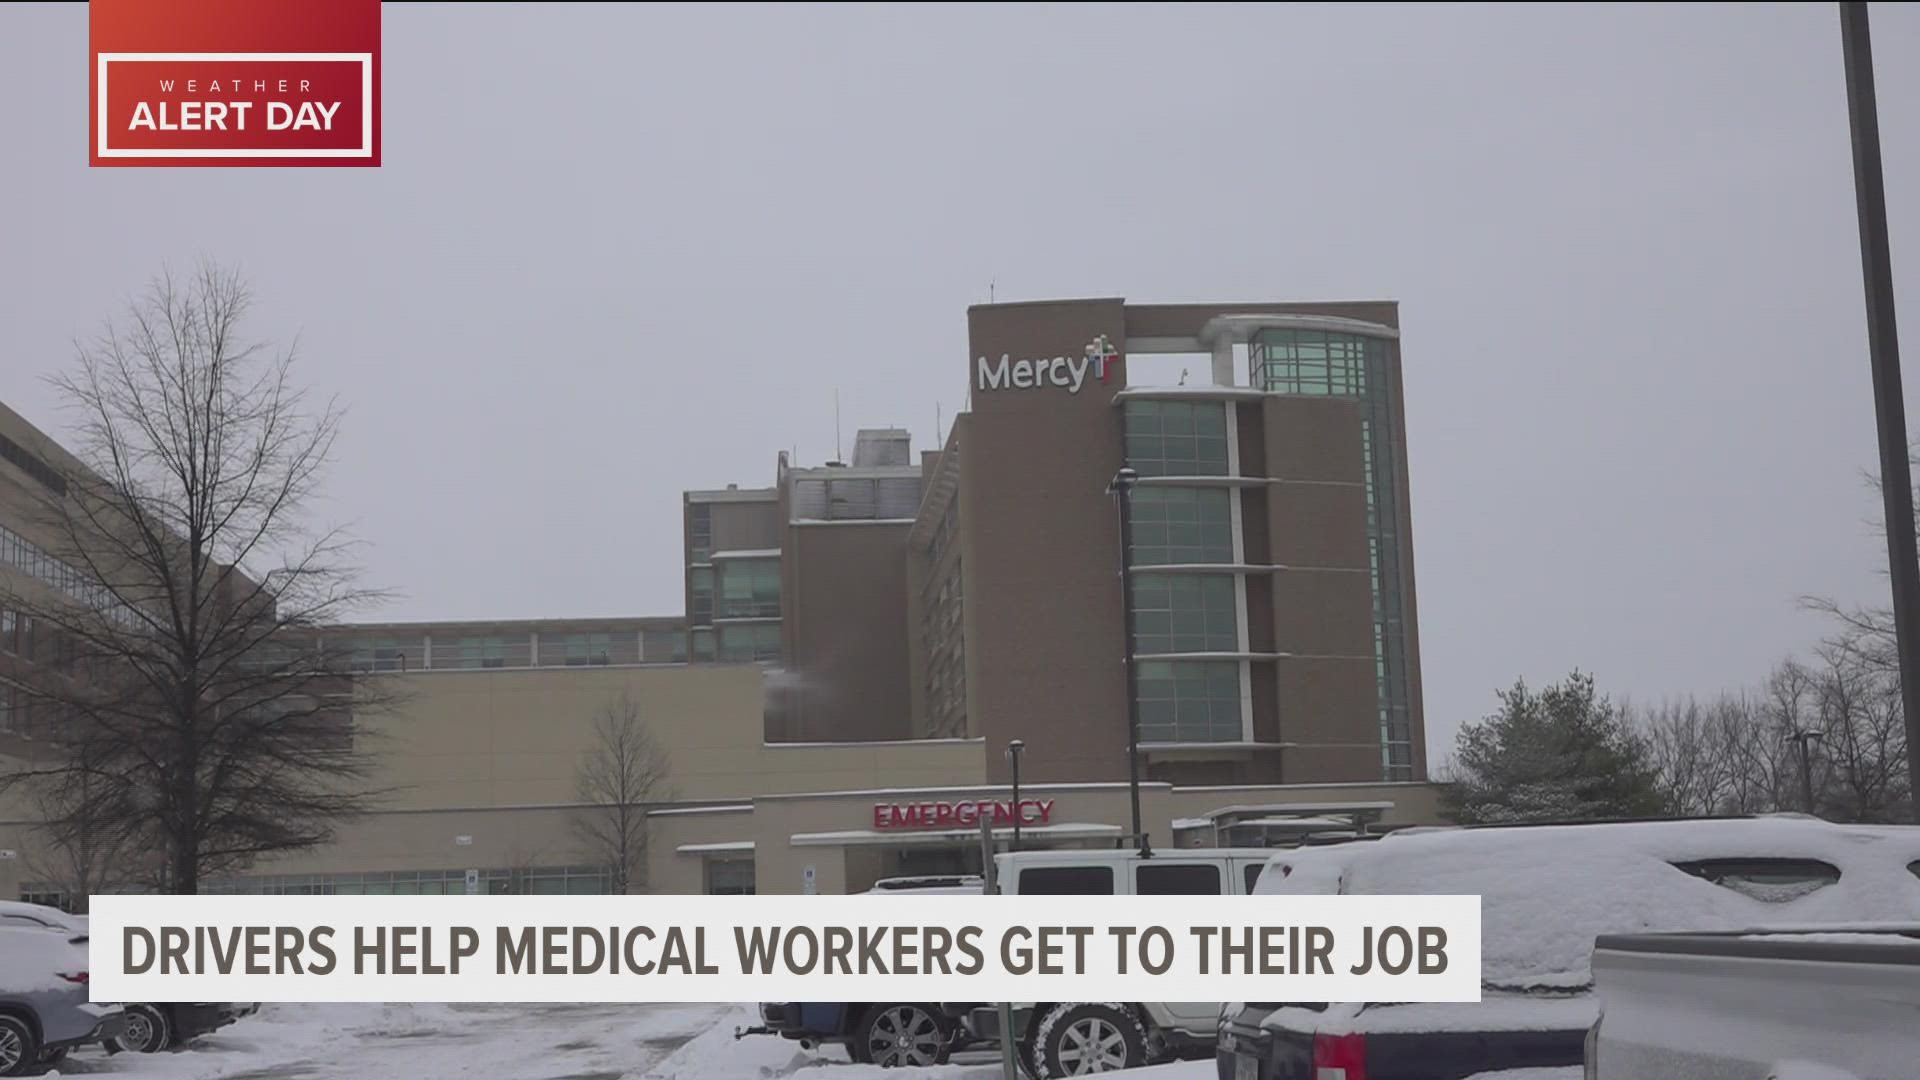 Angels on Ice are helping make sure medical workers can get to their jobs on the snowy roads in Northwest Arkansas.